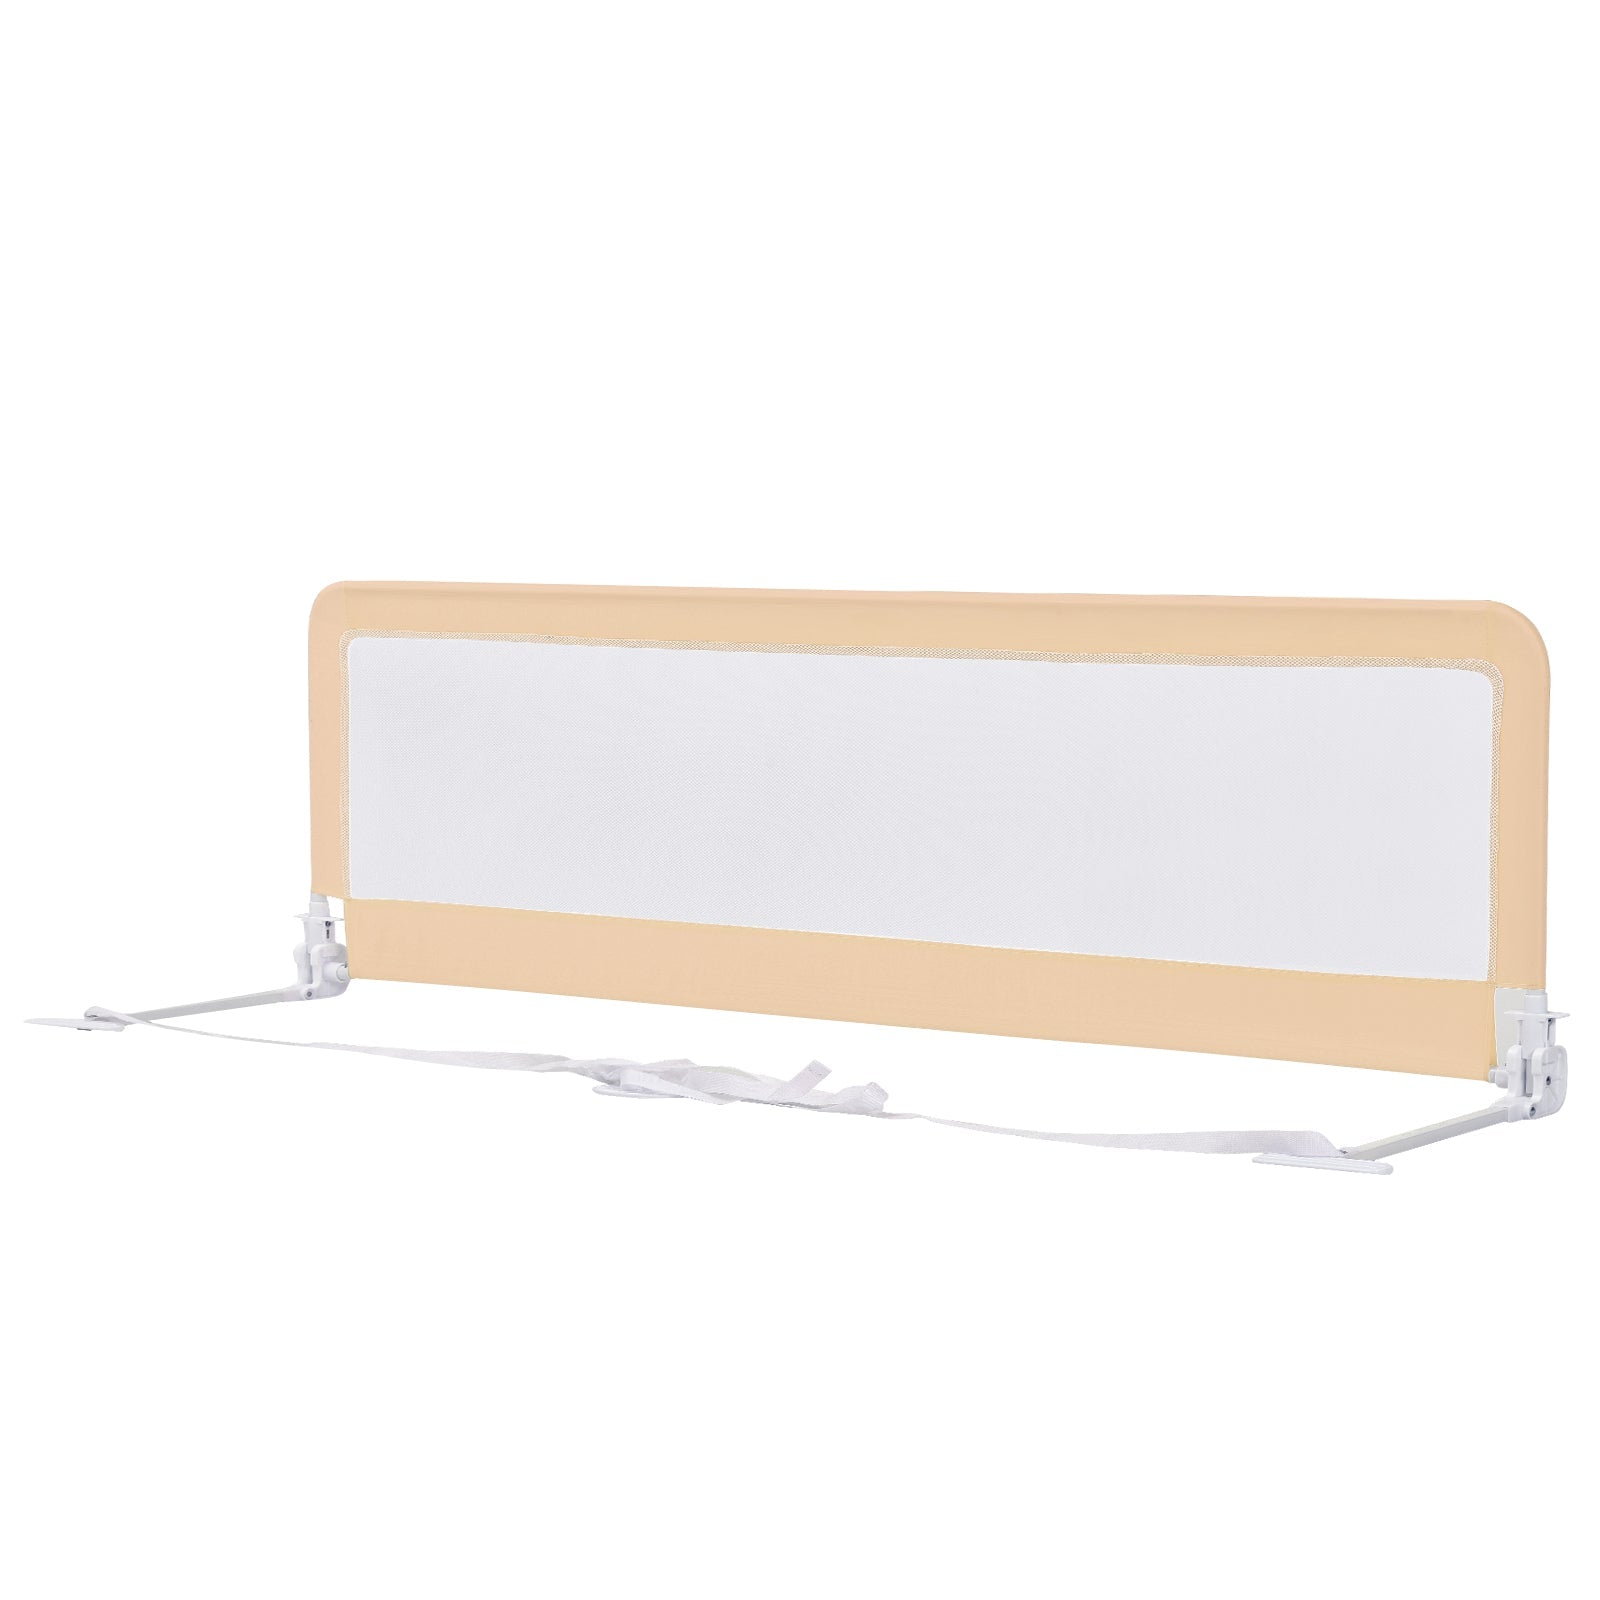 Beige Foldable Toddler Bed Rail - Mesh Design with Safety Straps